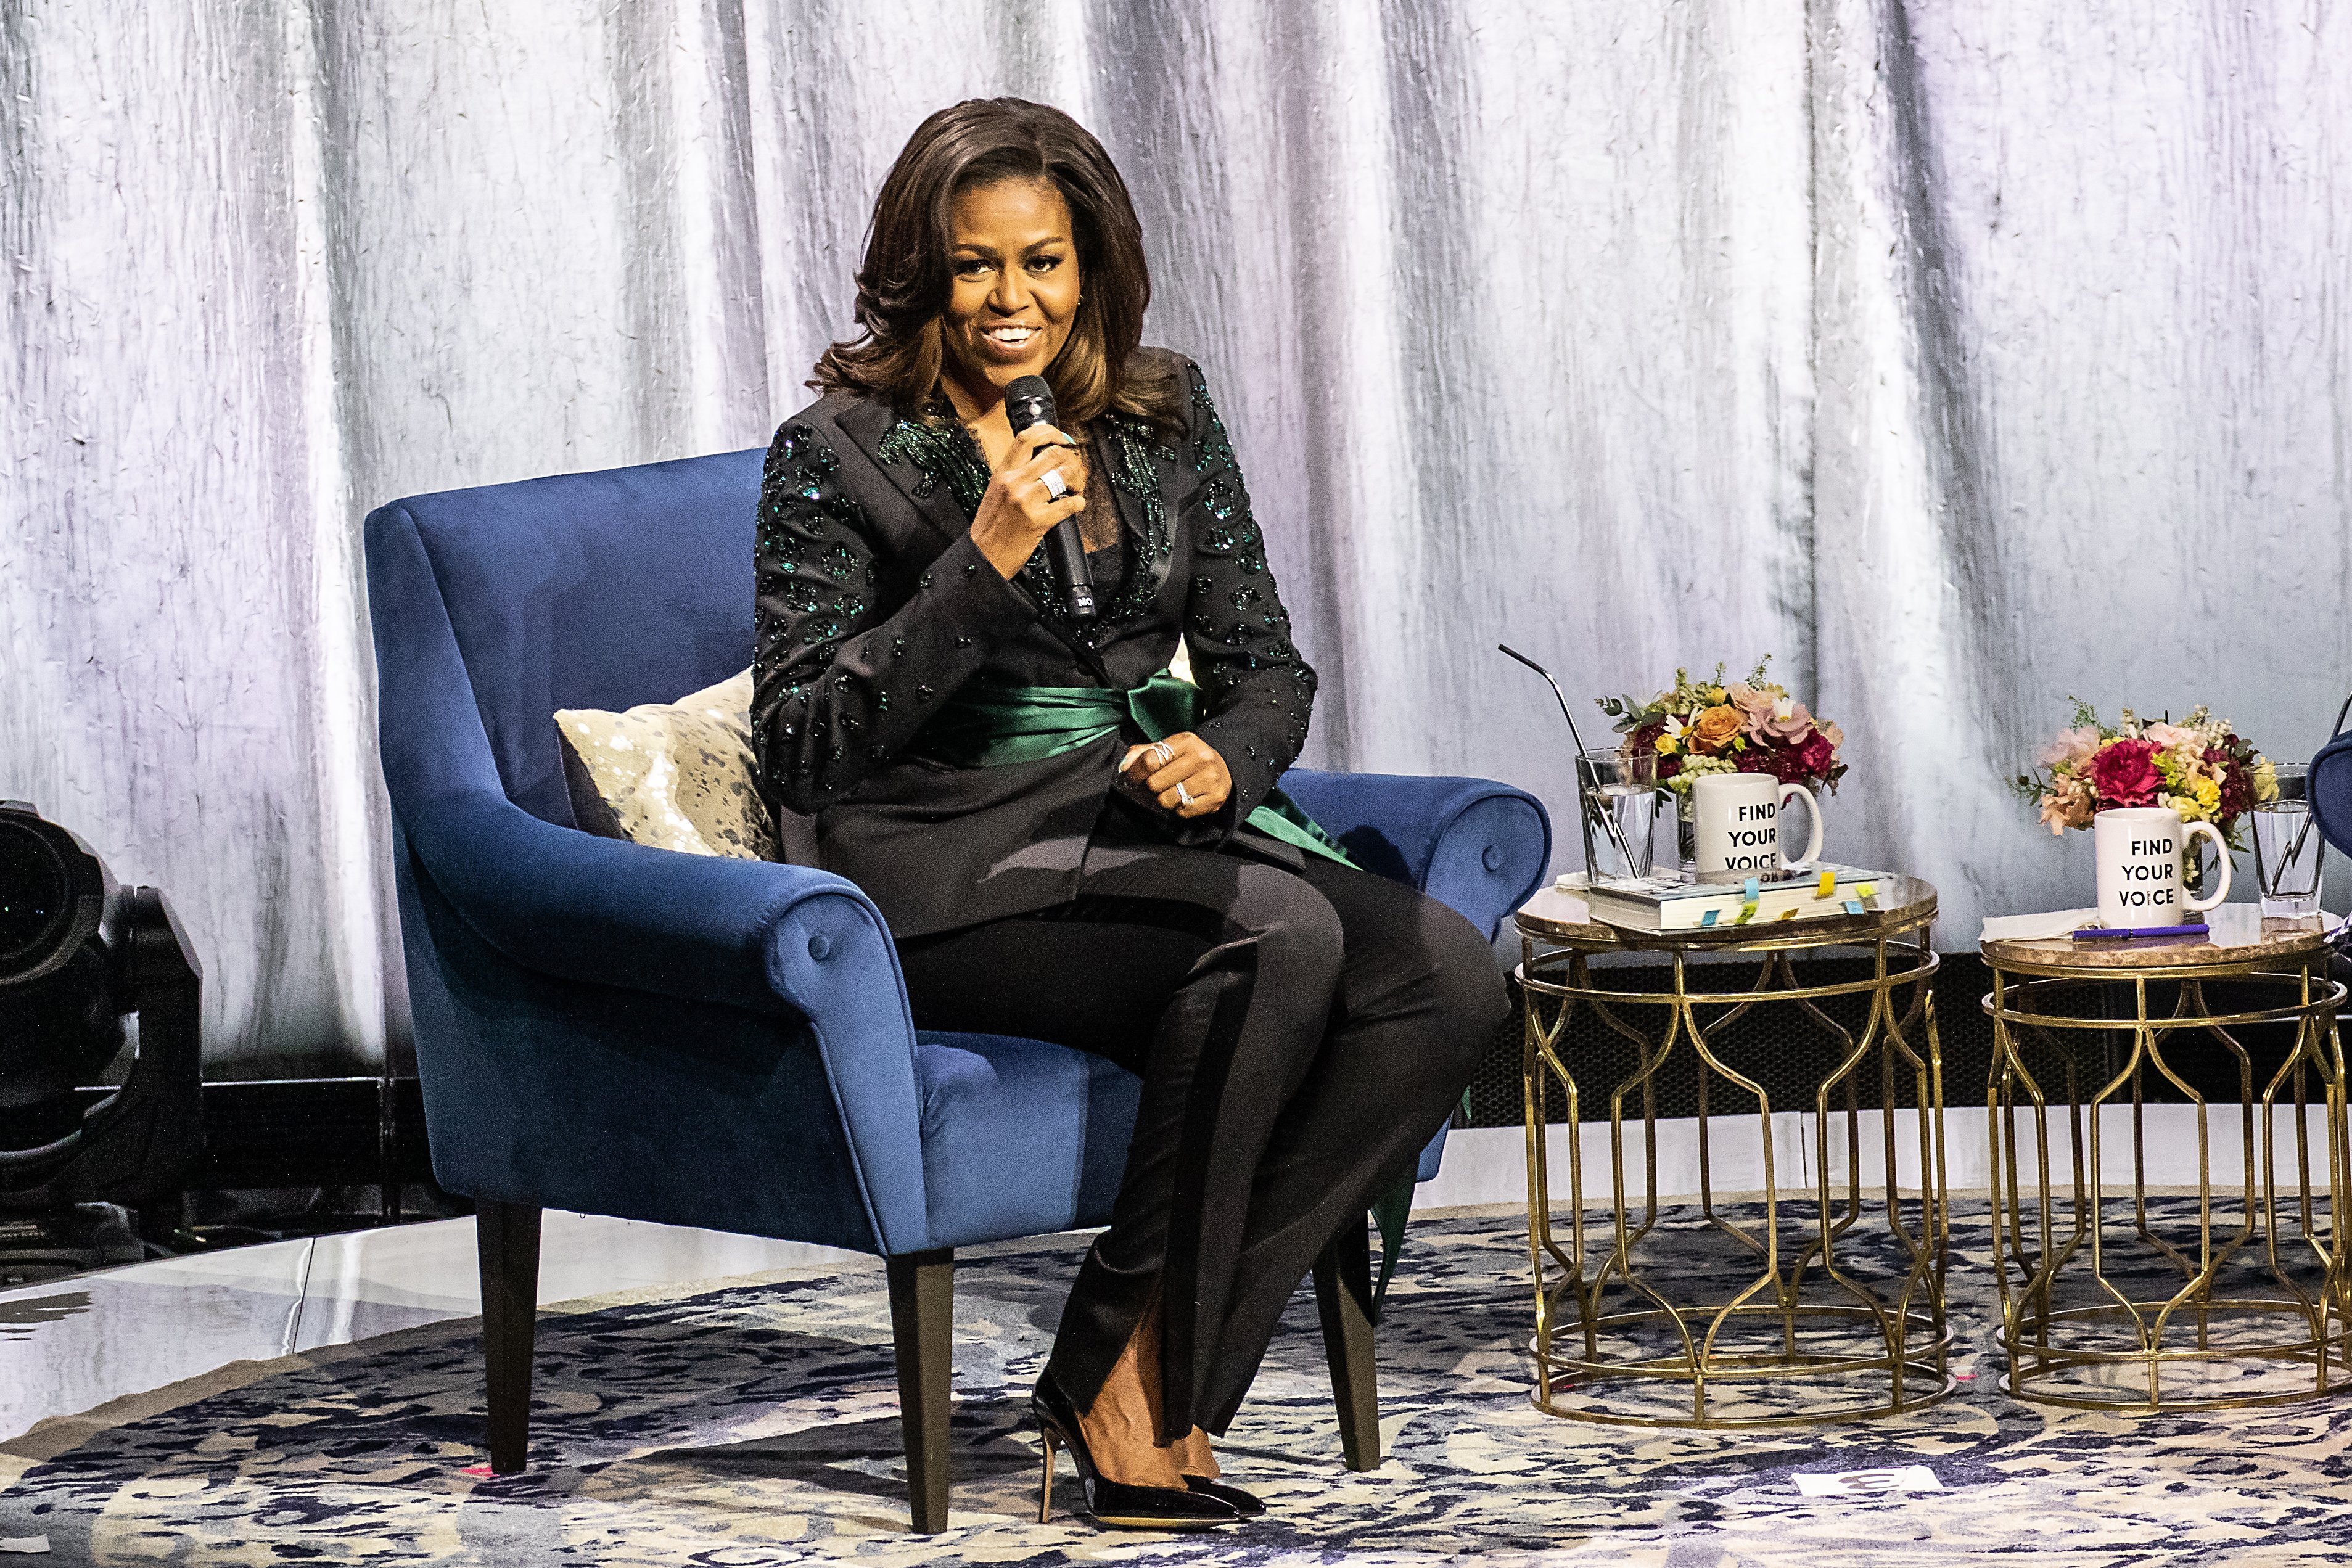 Michelle Obama held a conversation with Phoebe Robinson about her book "Becoming" at Oslo Spektrum on April 11, 2019 in Oslo, Norway. | Photo: Getty Images